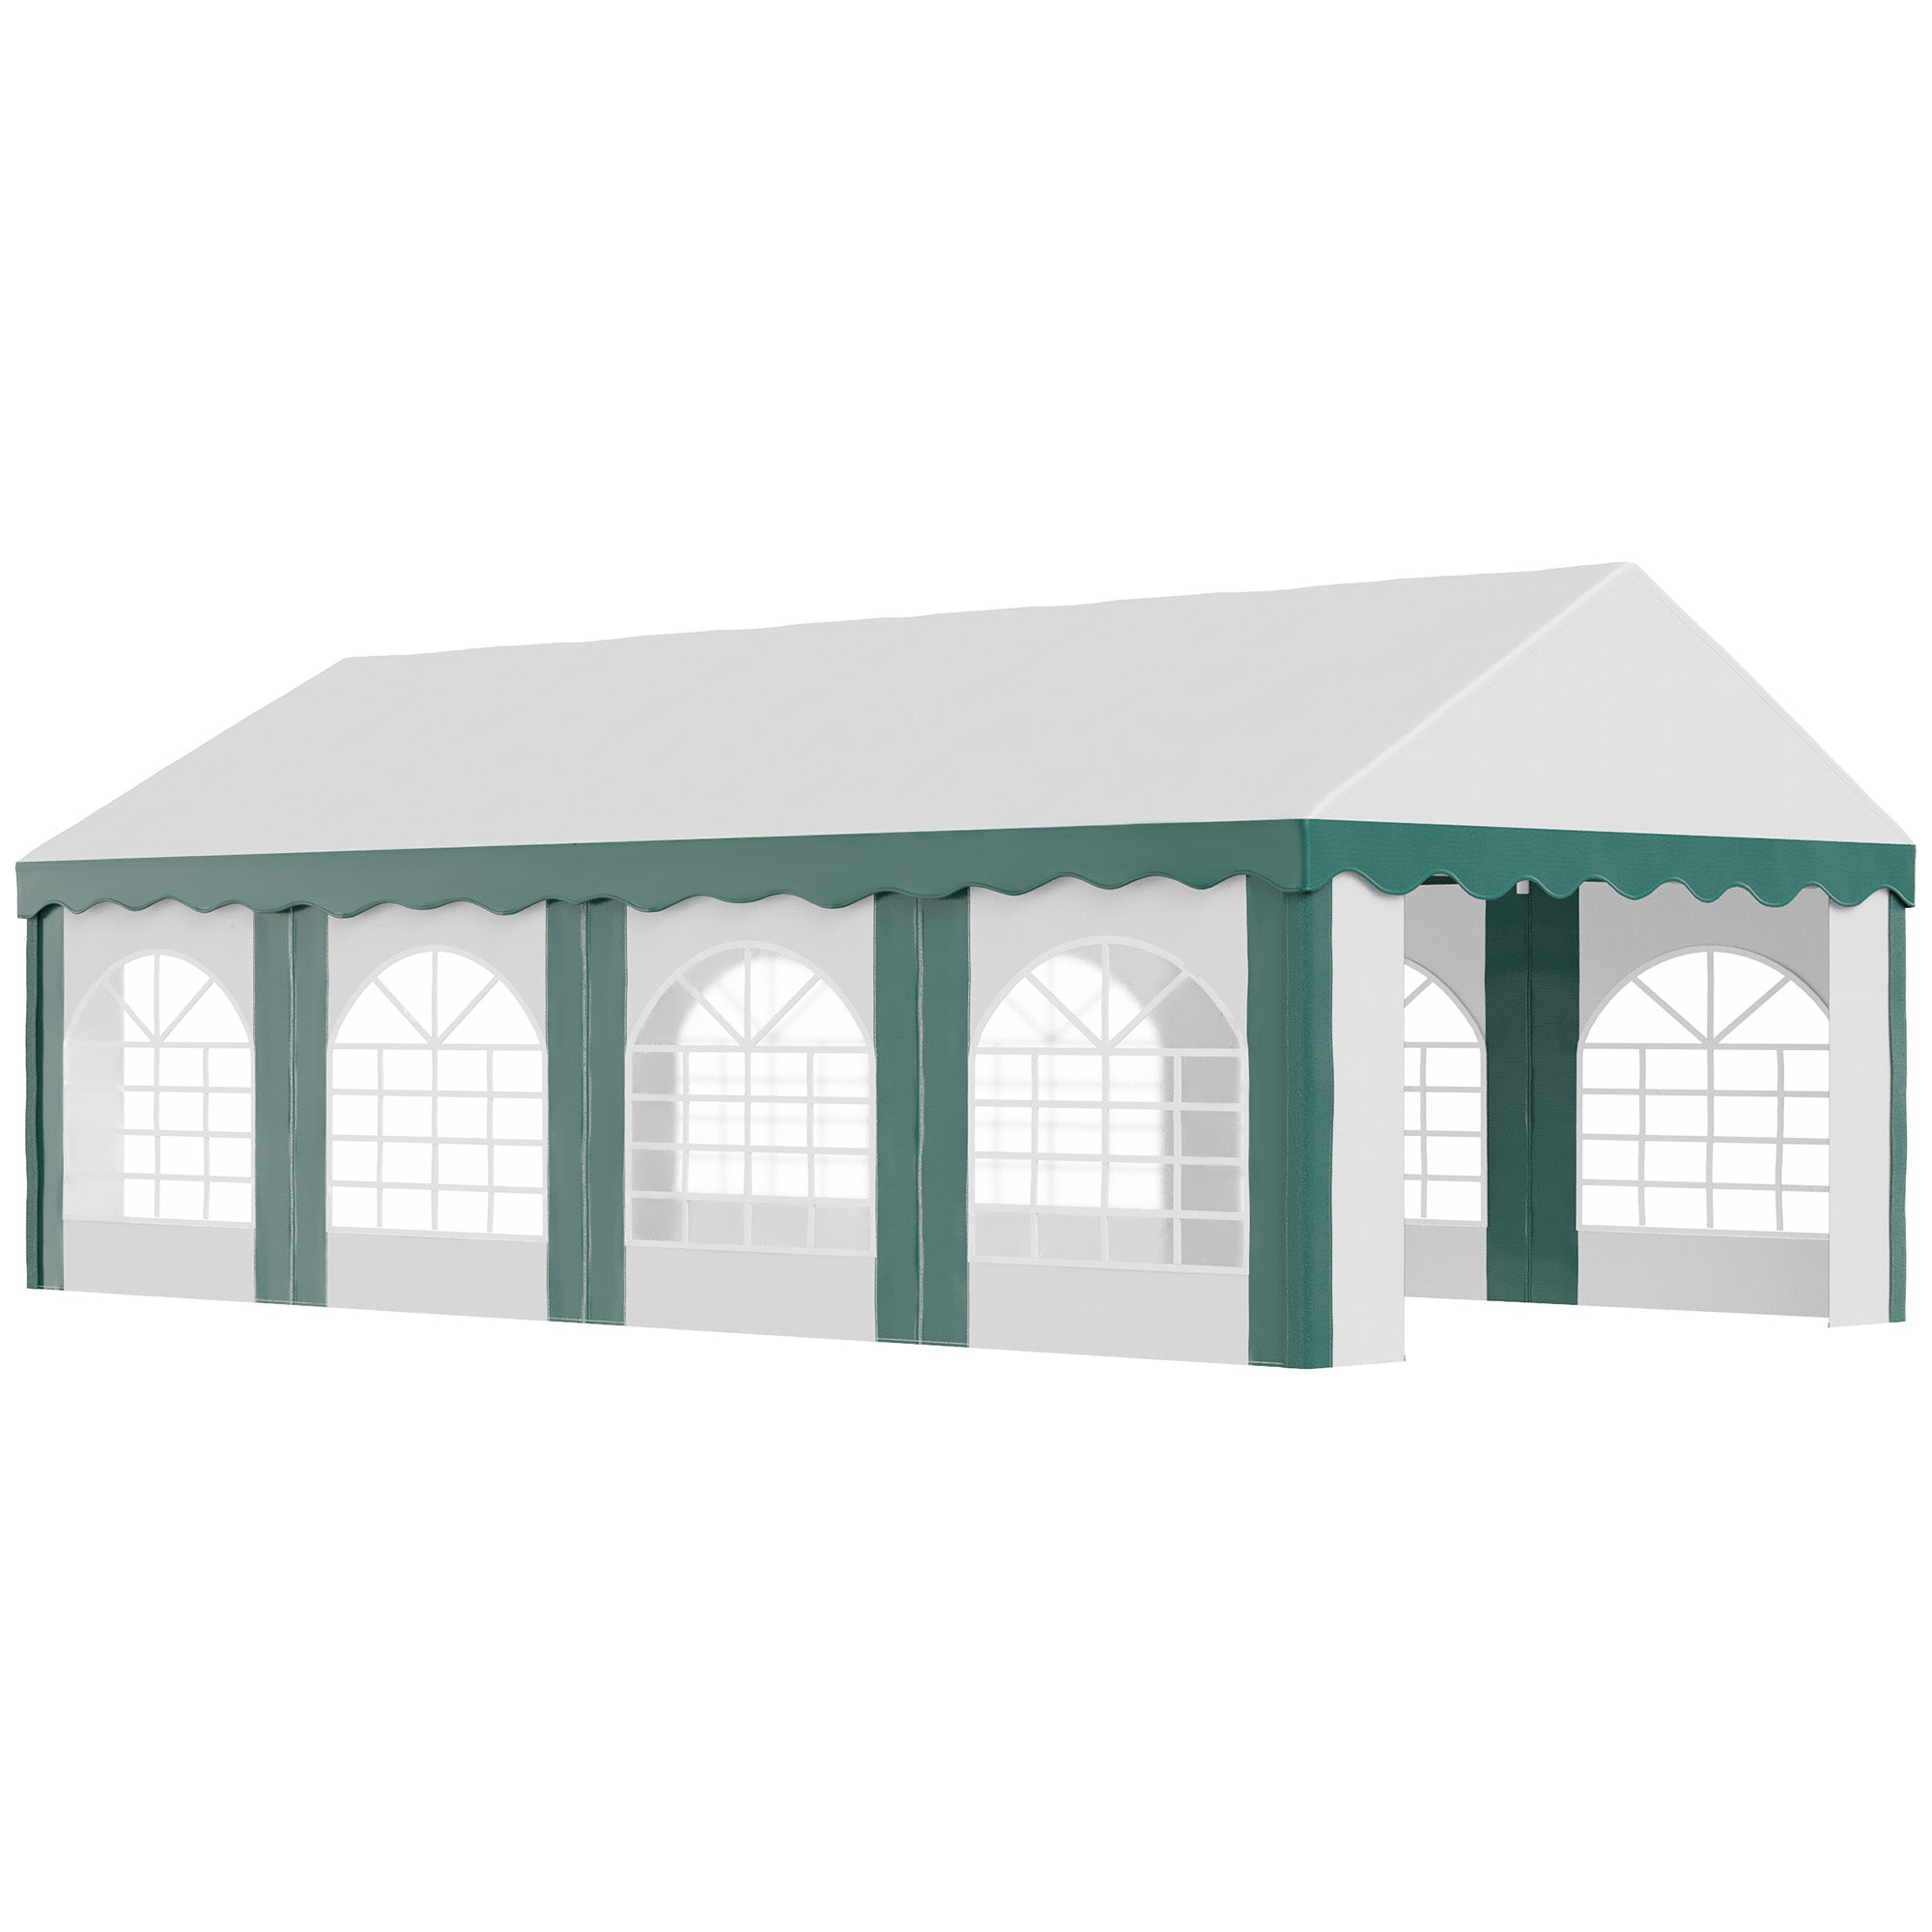 8 x 4m Garden Gazebo with Sides, Galvanised Marquee Party Tent with Eight Windows and Double Doors, for Parties, Wedding and Events-0